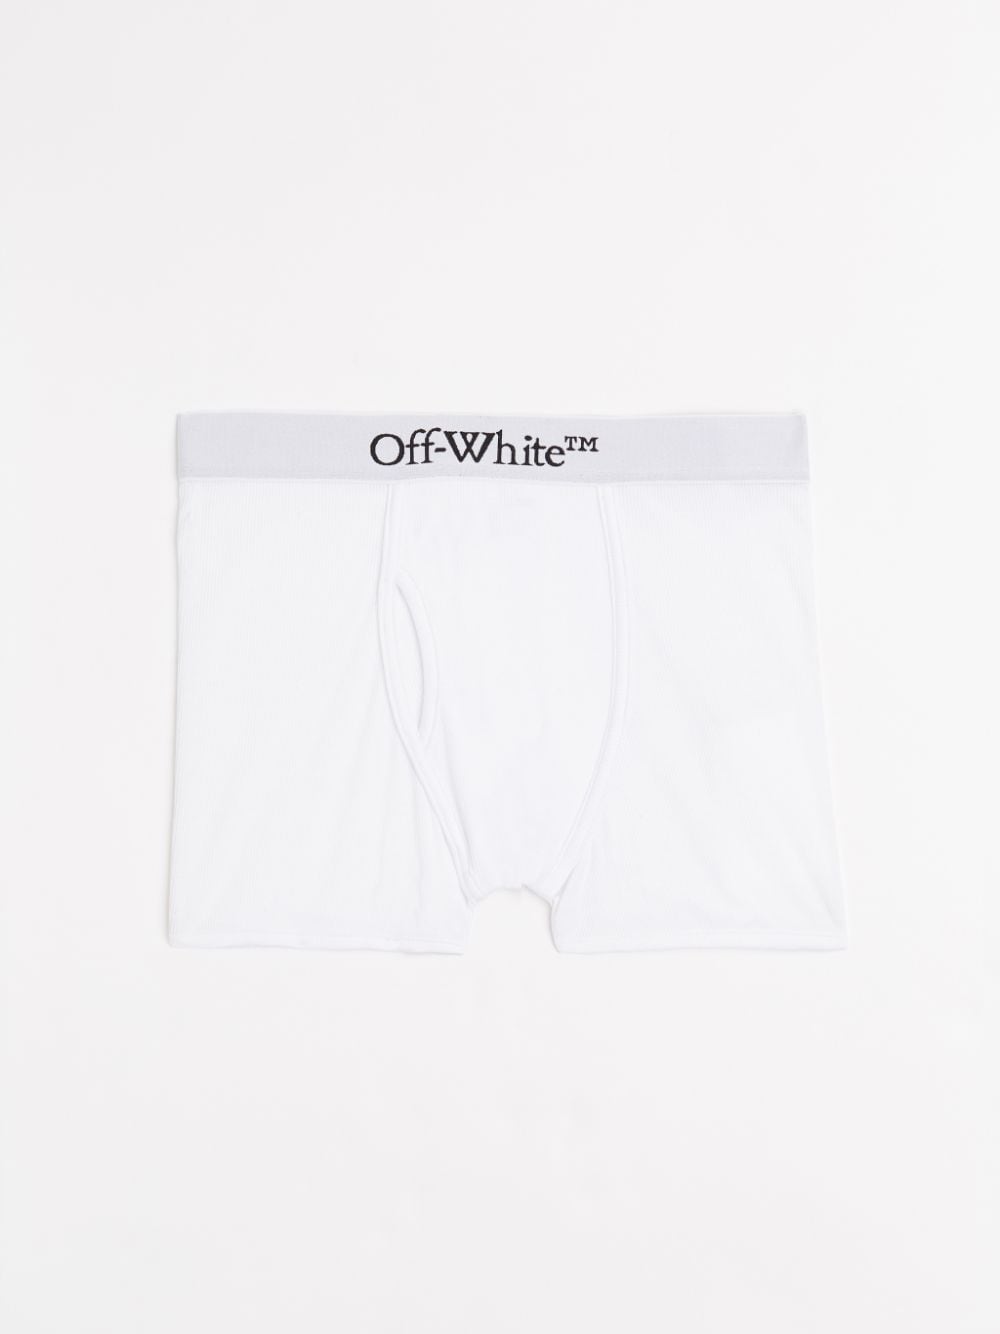 https://cdn-images.farfetch-contents.com/off-white-singlepack-logo-boxers_16865737_42670963_1000.jpg